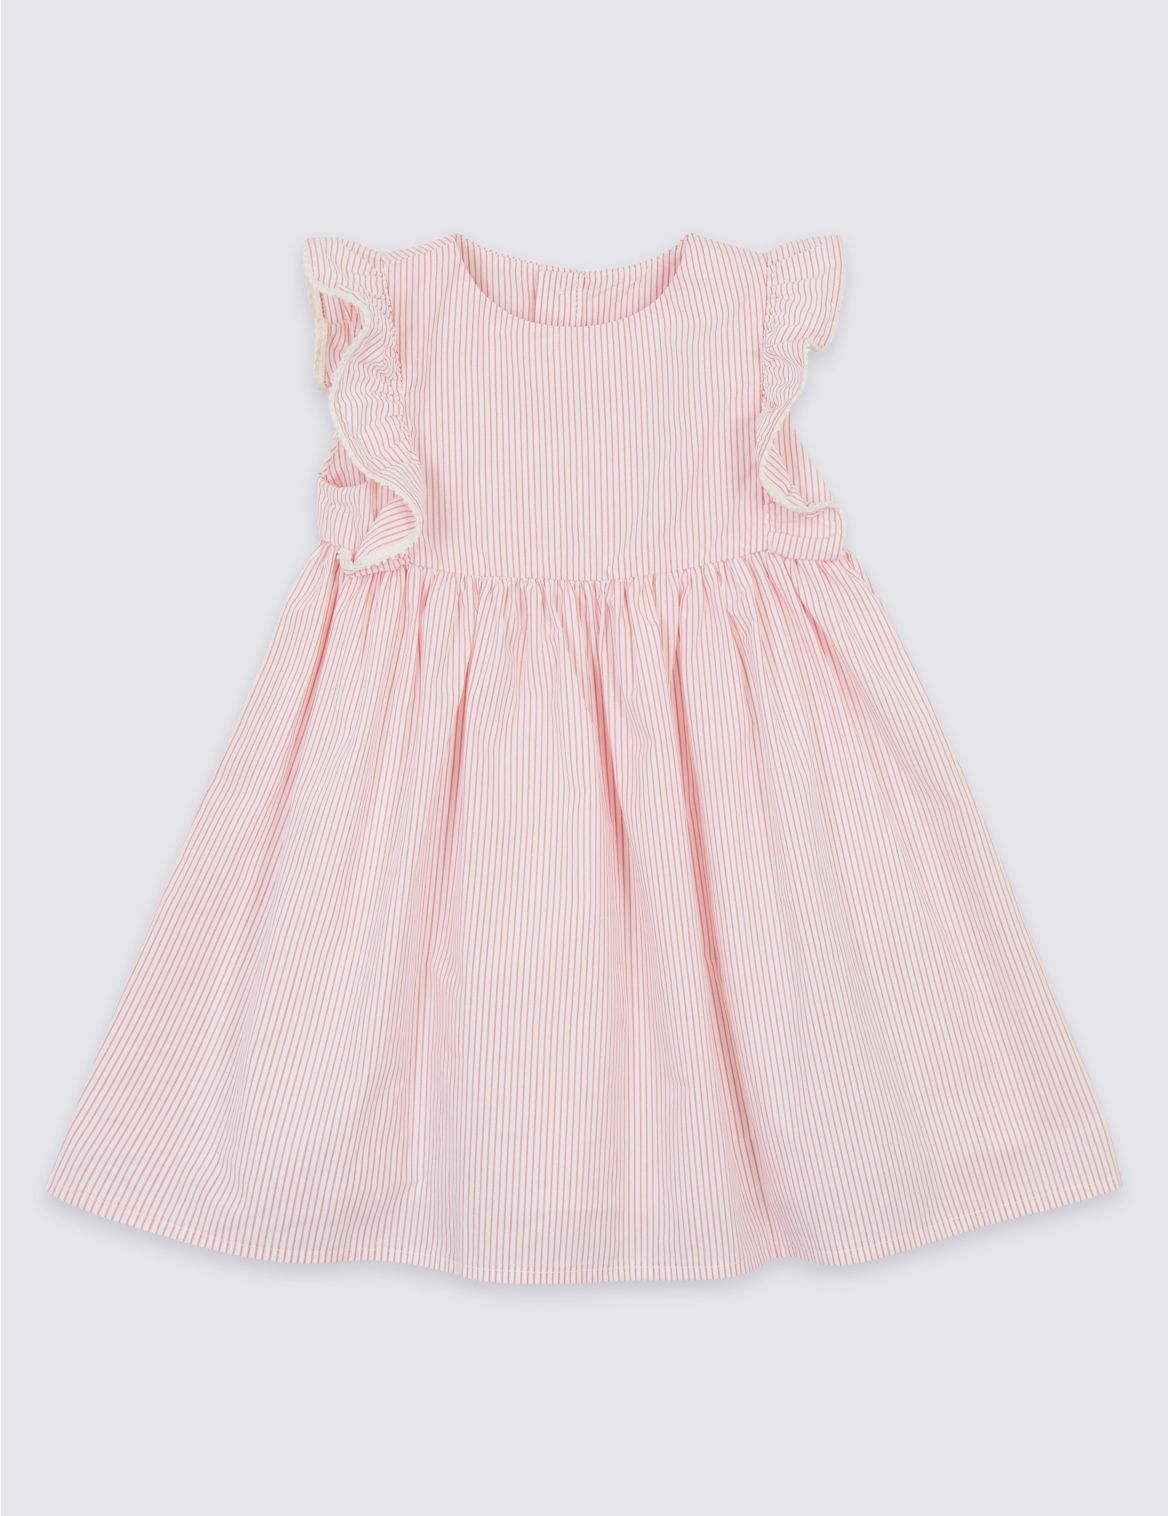 Ribbons & Booties: My Favorites from Recent Marks & Spencer's Kids ...